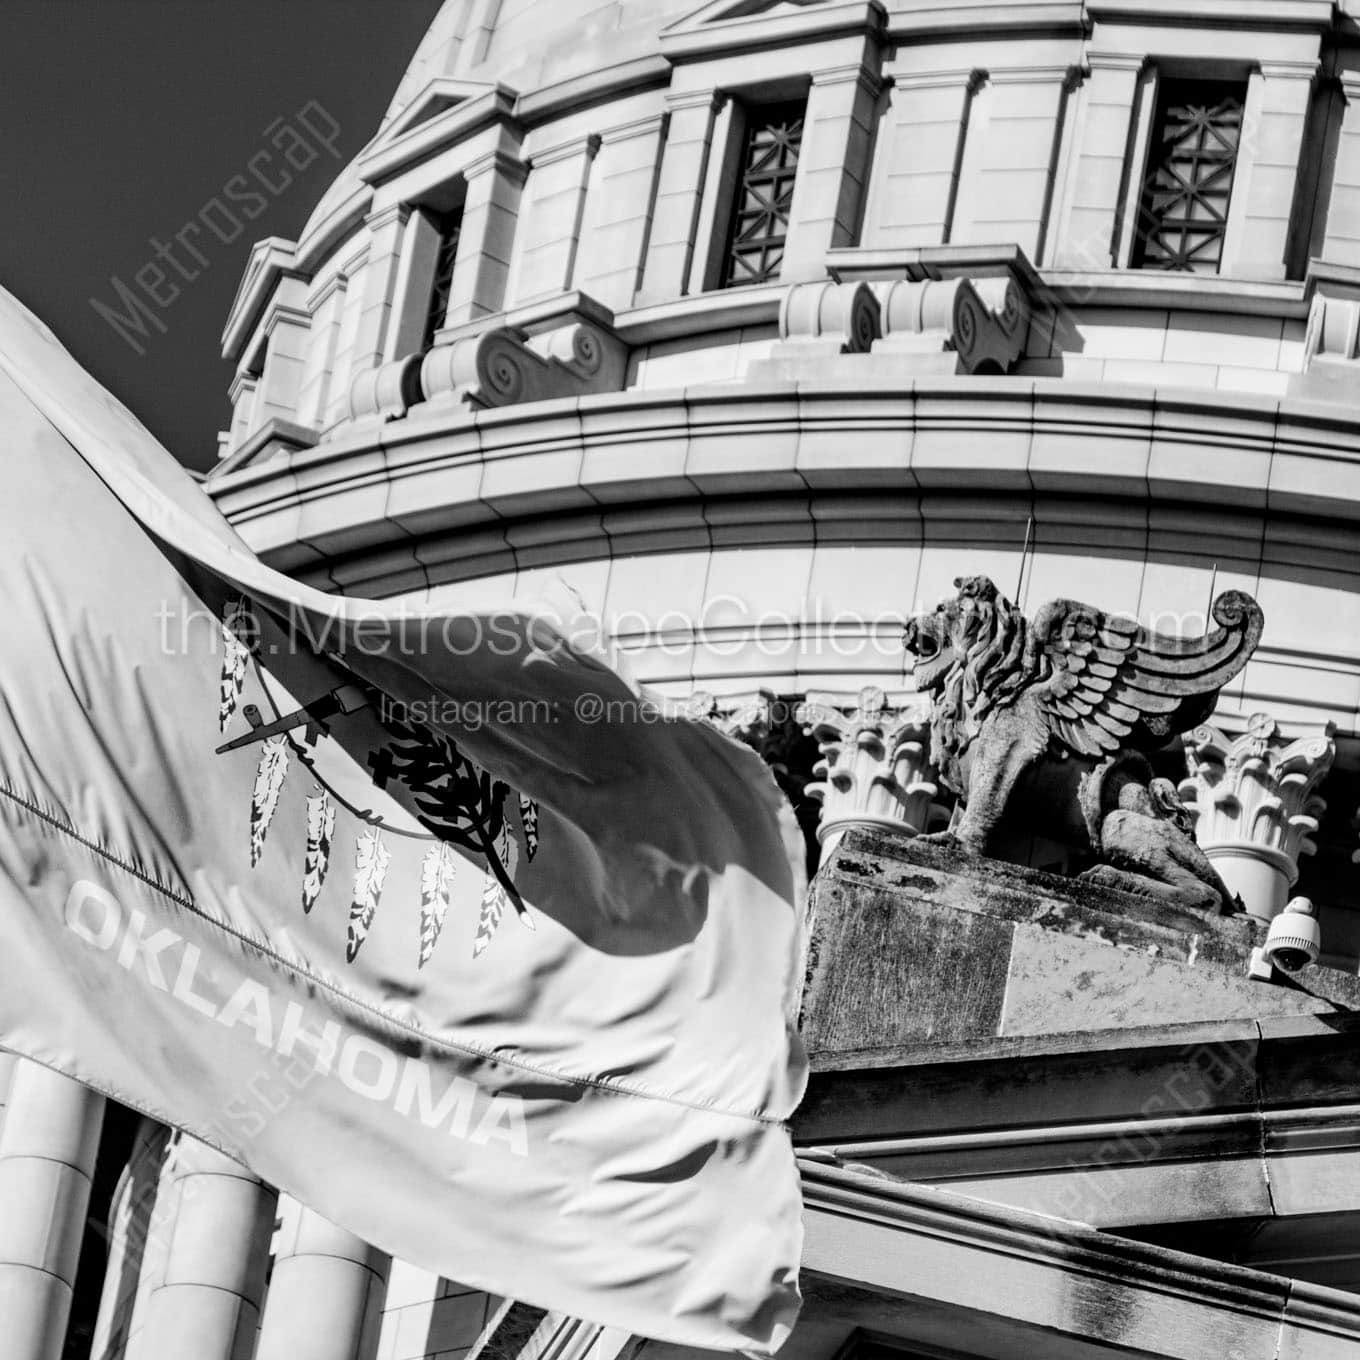 oklahoma flag and griffin on capitol building Black & White Office Art